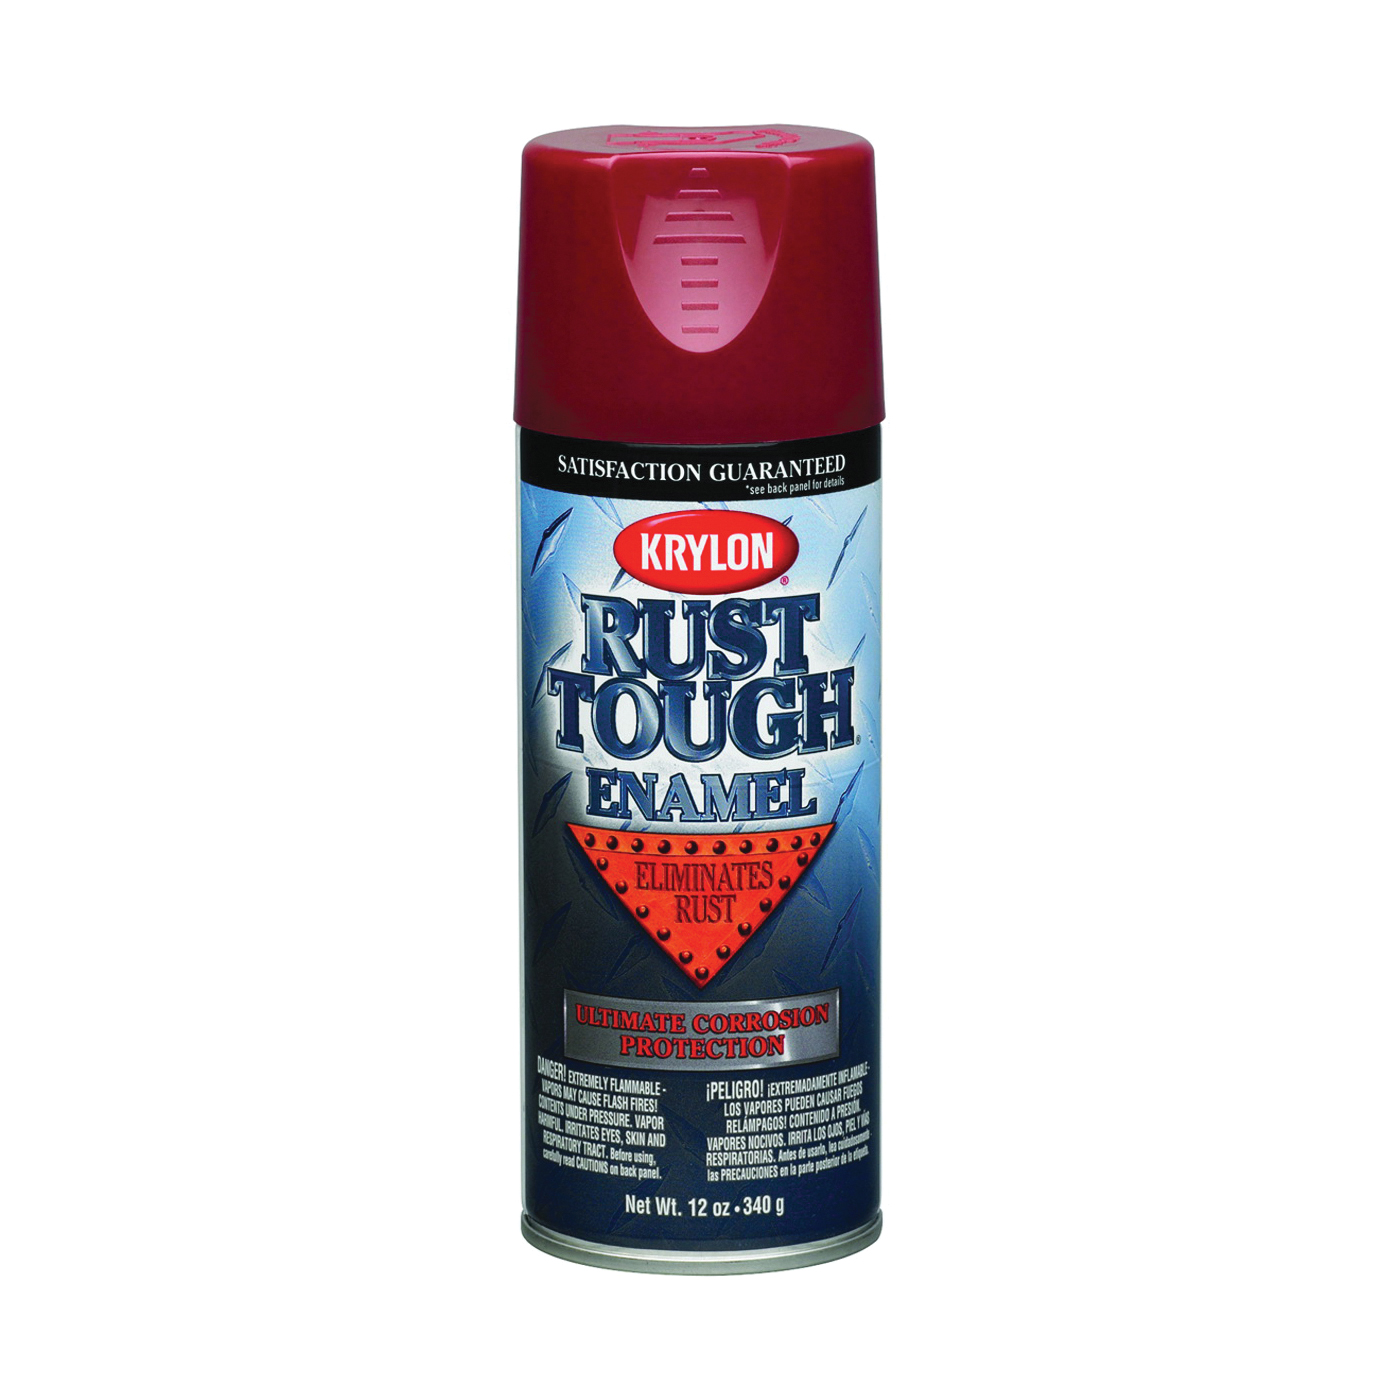 Rust Tough K09210007 Rust Preventative Spray Paint, Gloss, Radiant Red, 12 oz, Can